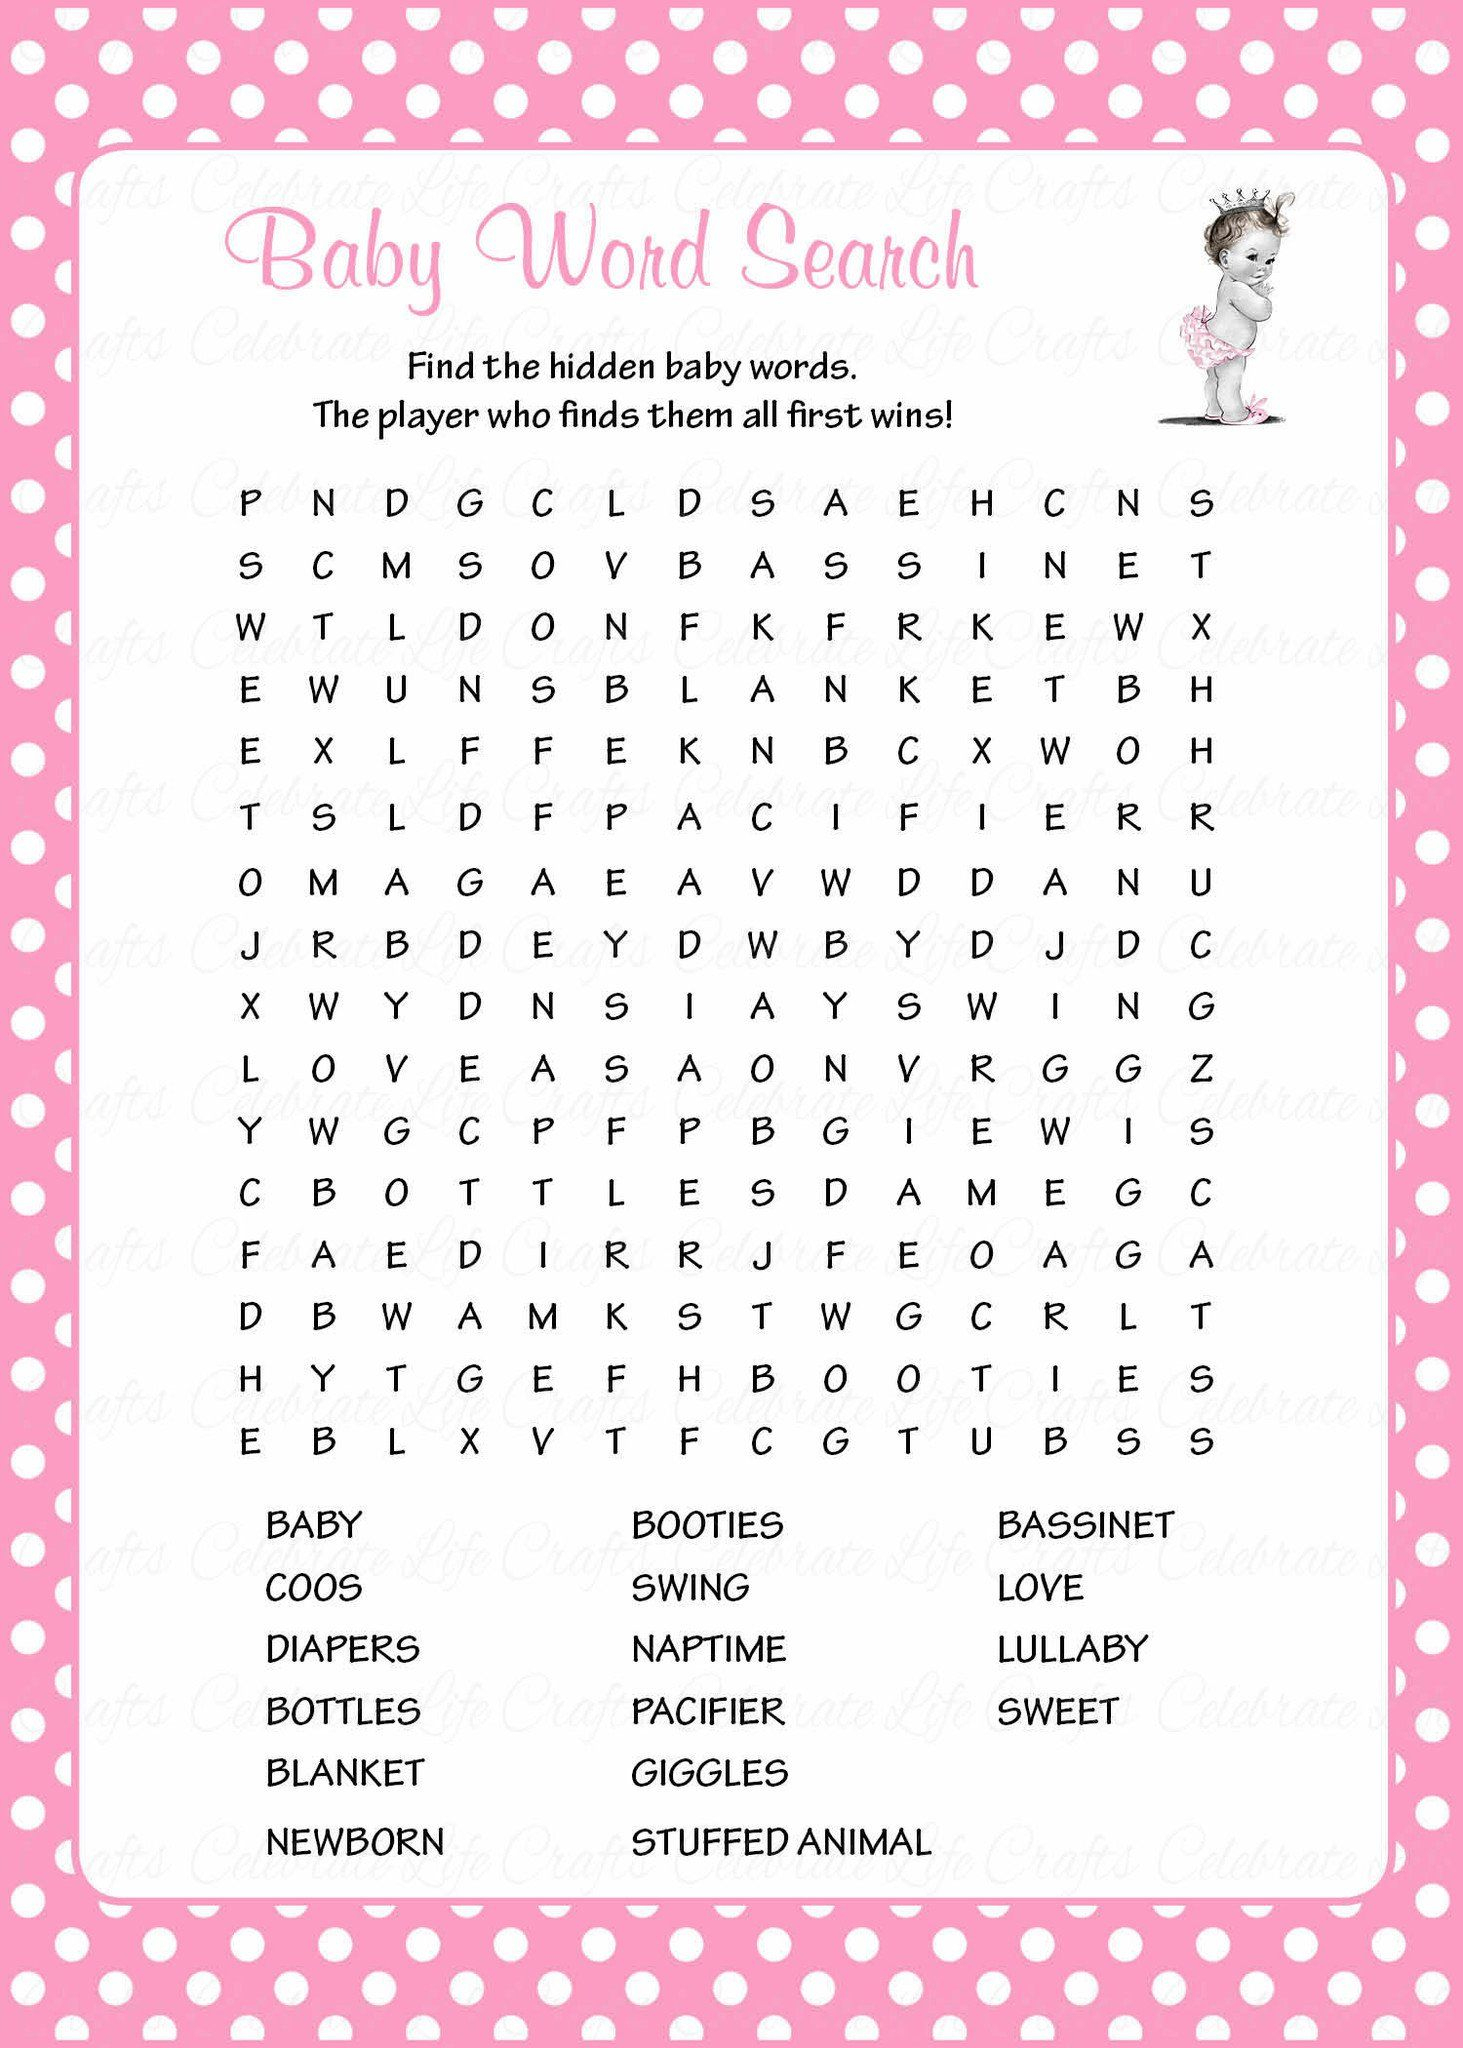 Baby Word Search - Printable Download - Pink Polka Baby